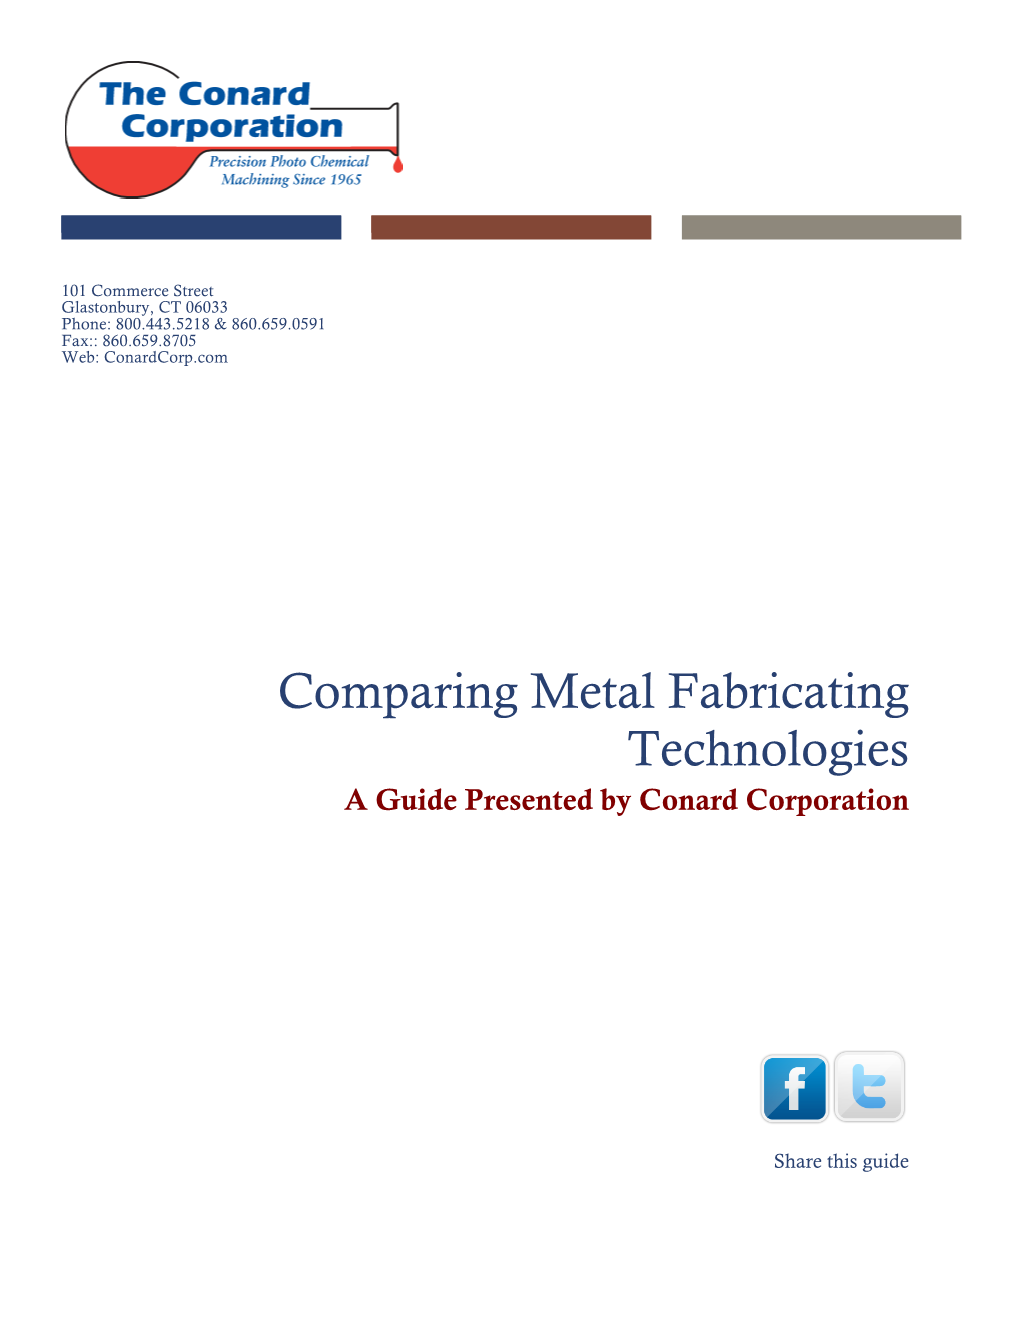 Comparing Metal Fabricating Technologies a Guide Presented by Conard Corporation